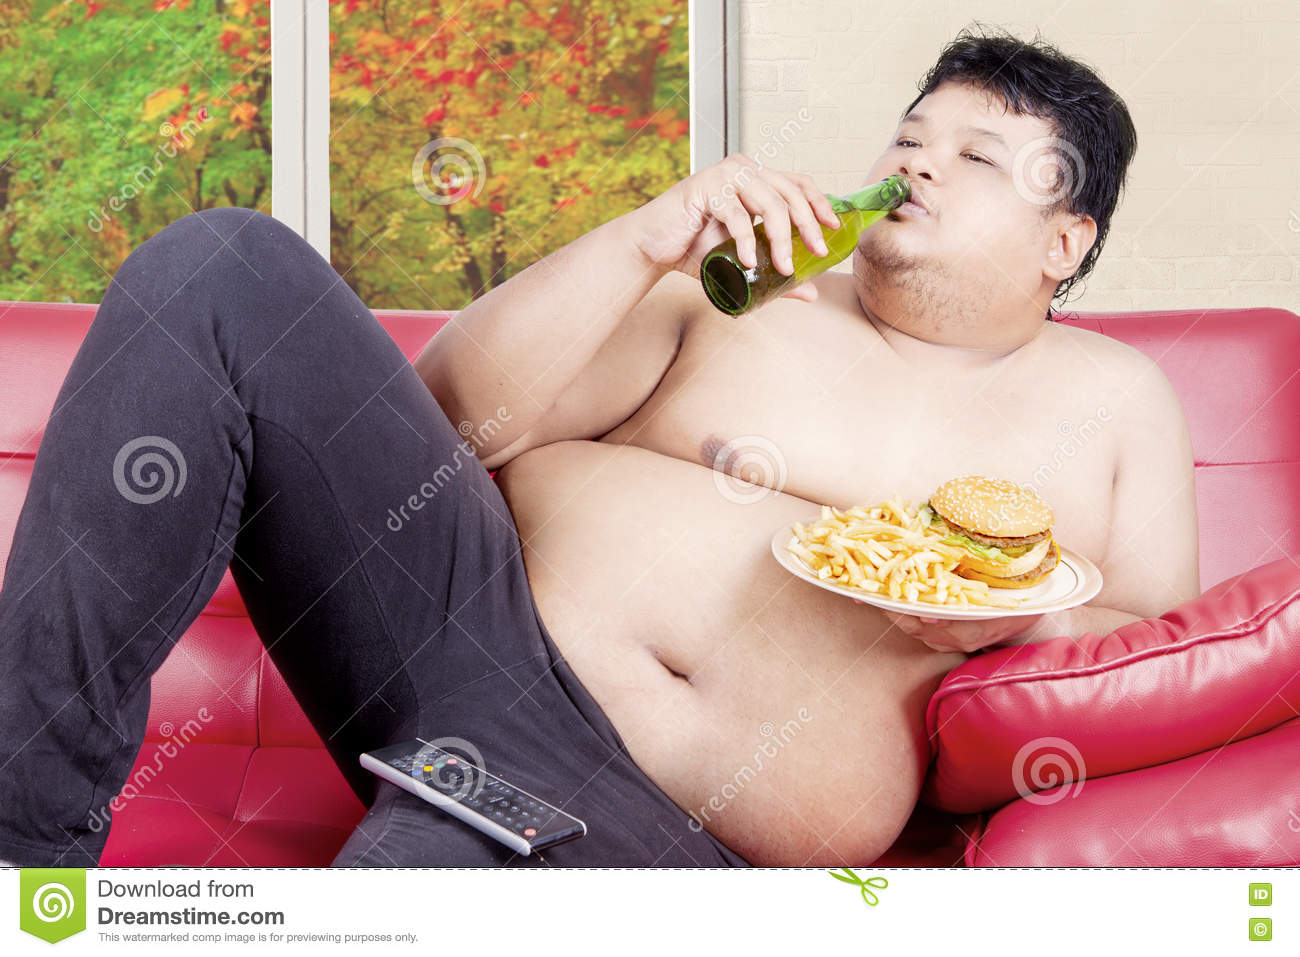 overweight-man-drinking-eating-couch-young-reclining-junk-food-autumn-background-window-79142779.jpg